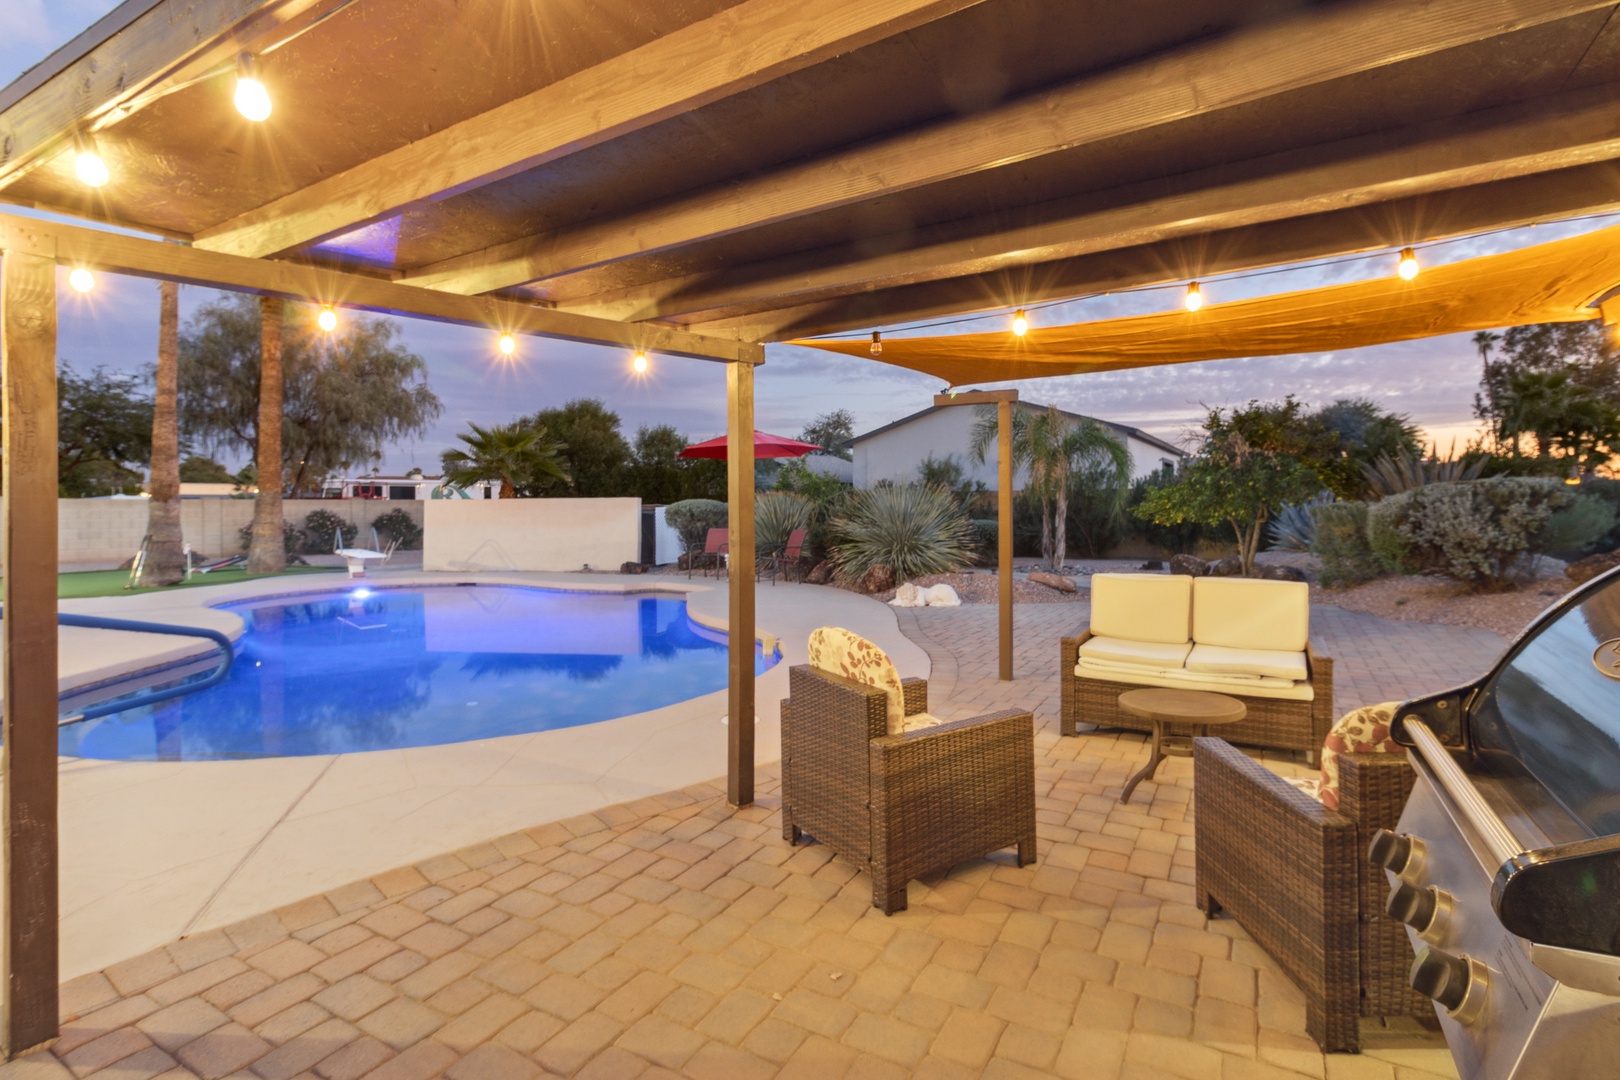 Scottsdale Vacation Rentals, OFB Thunderbird Retreat - Covered patio with twinkling lights to make every night a cozy and romantic one